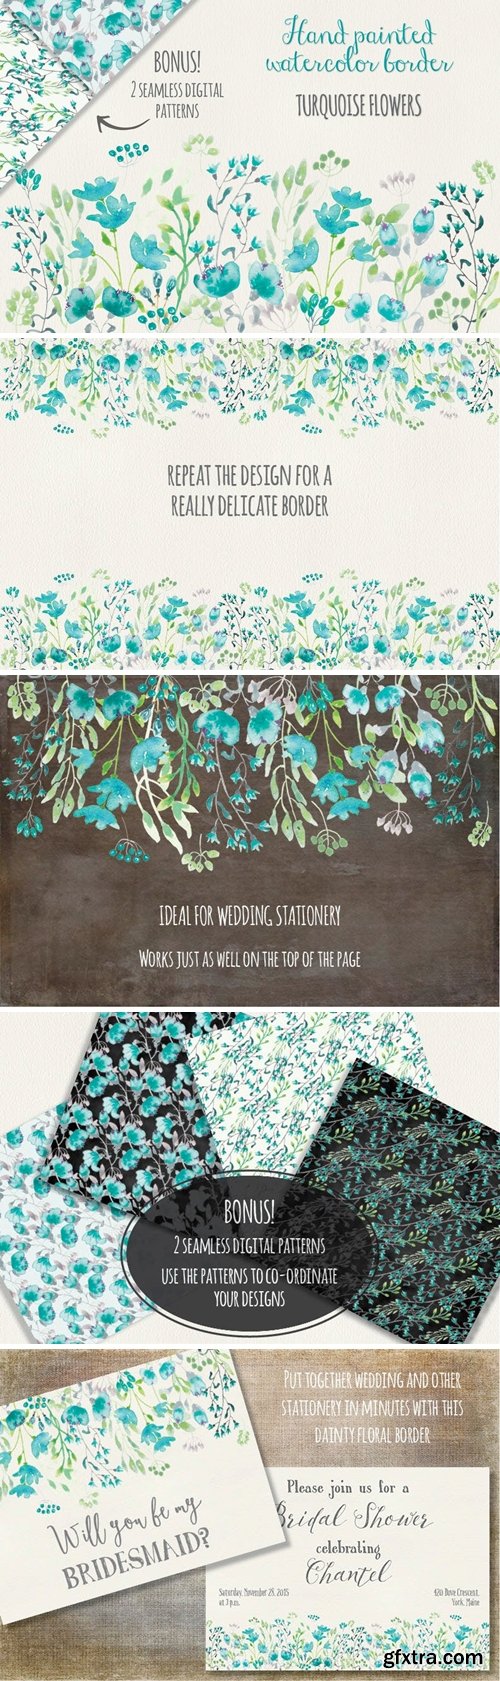 Turquoise Floral Border